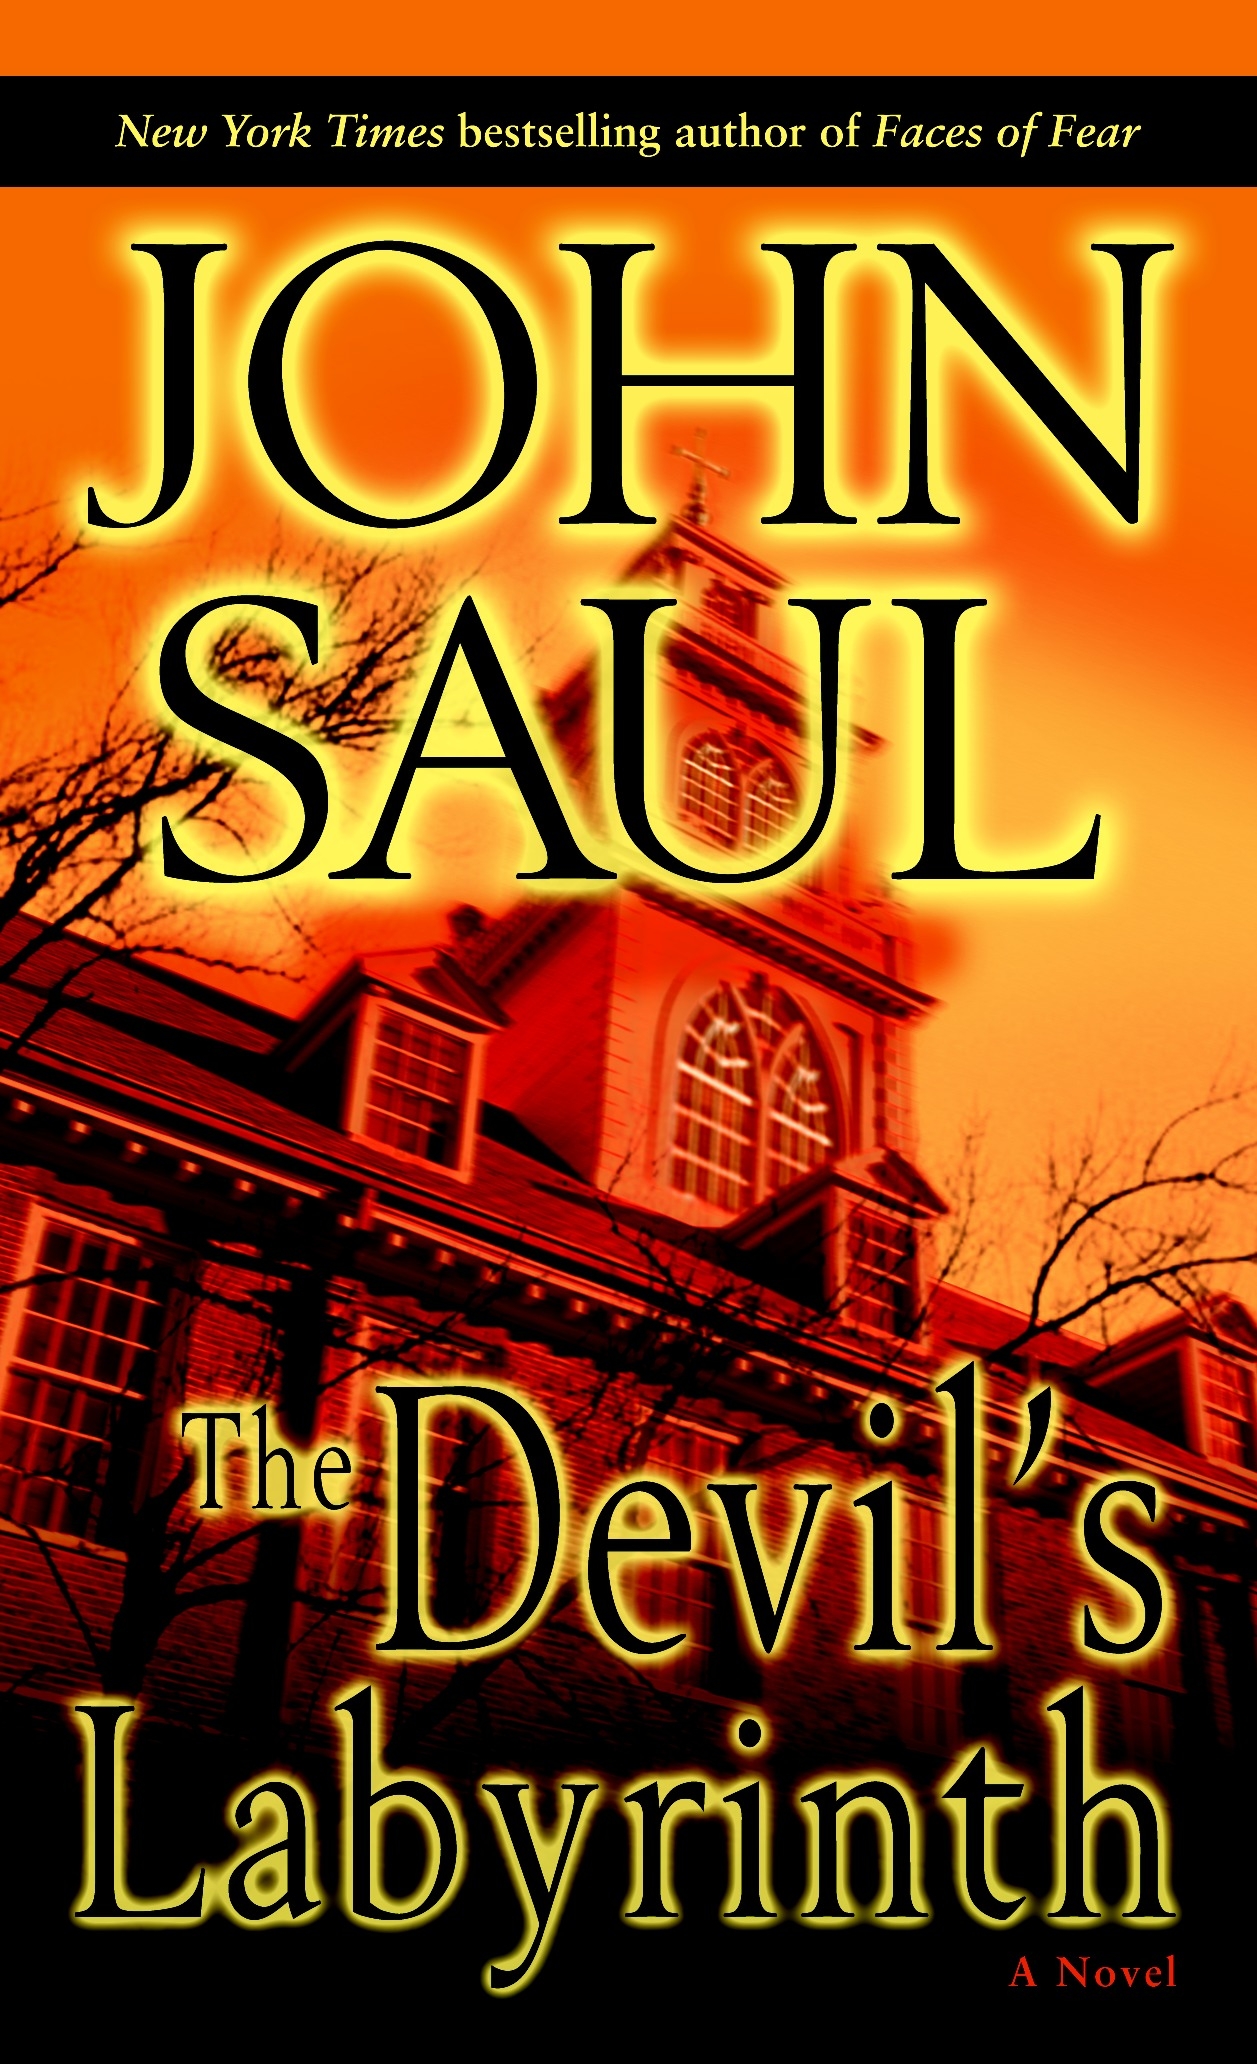 The Unloved by John Saul